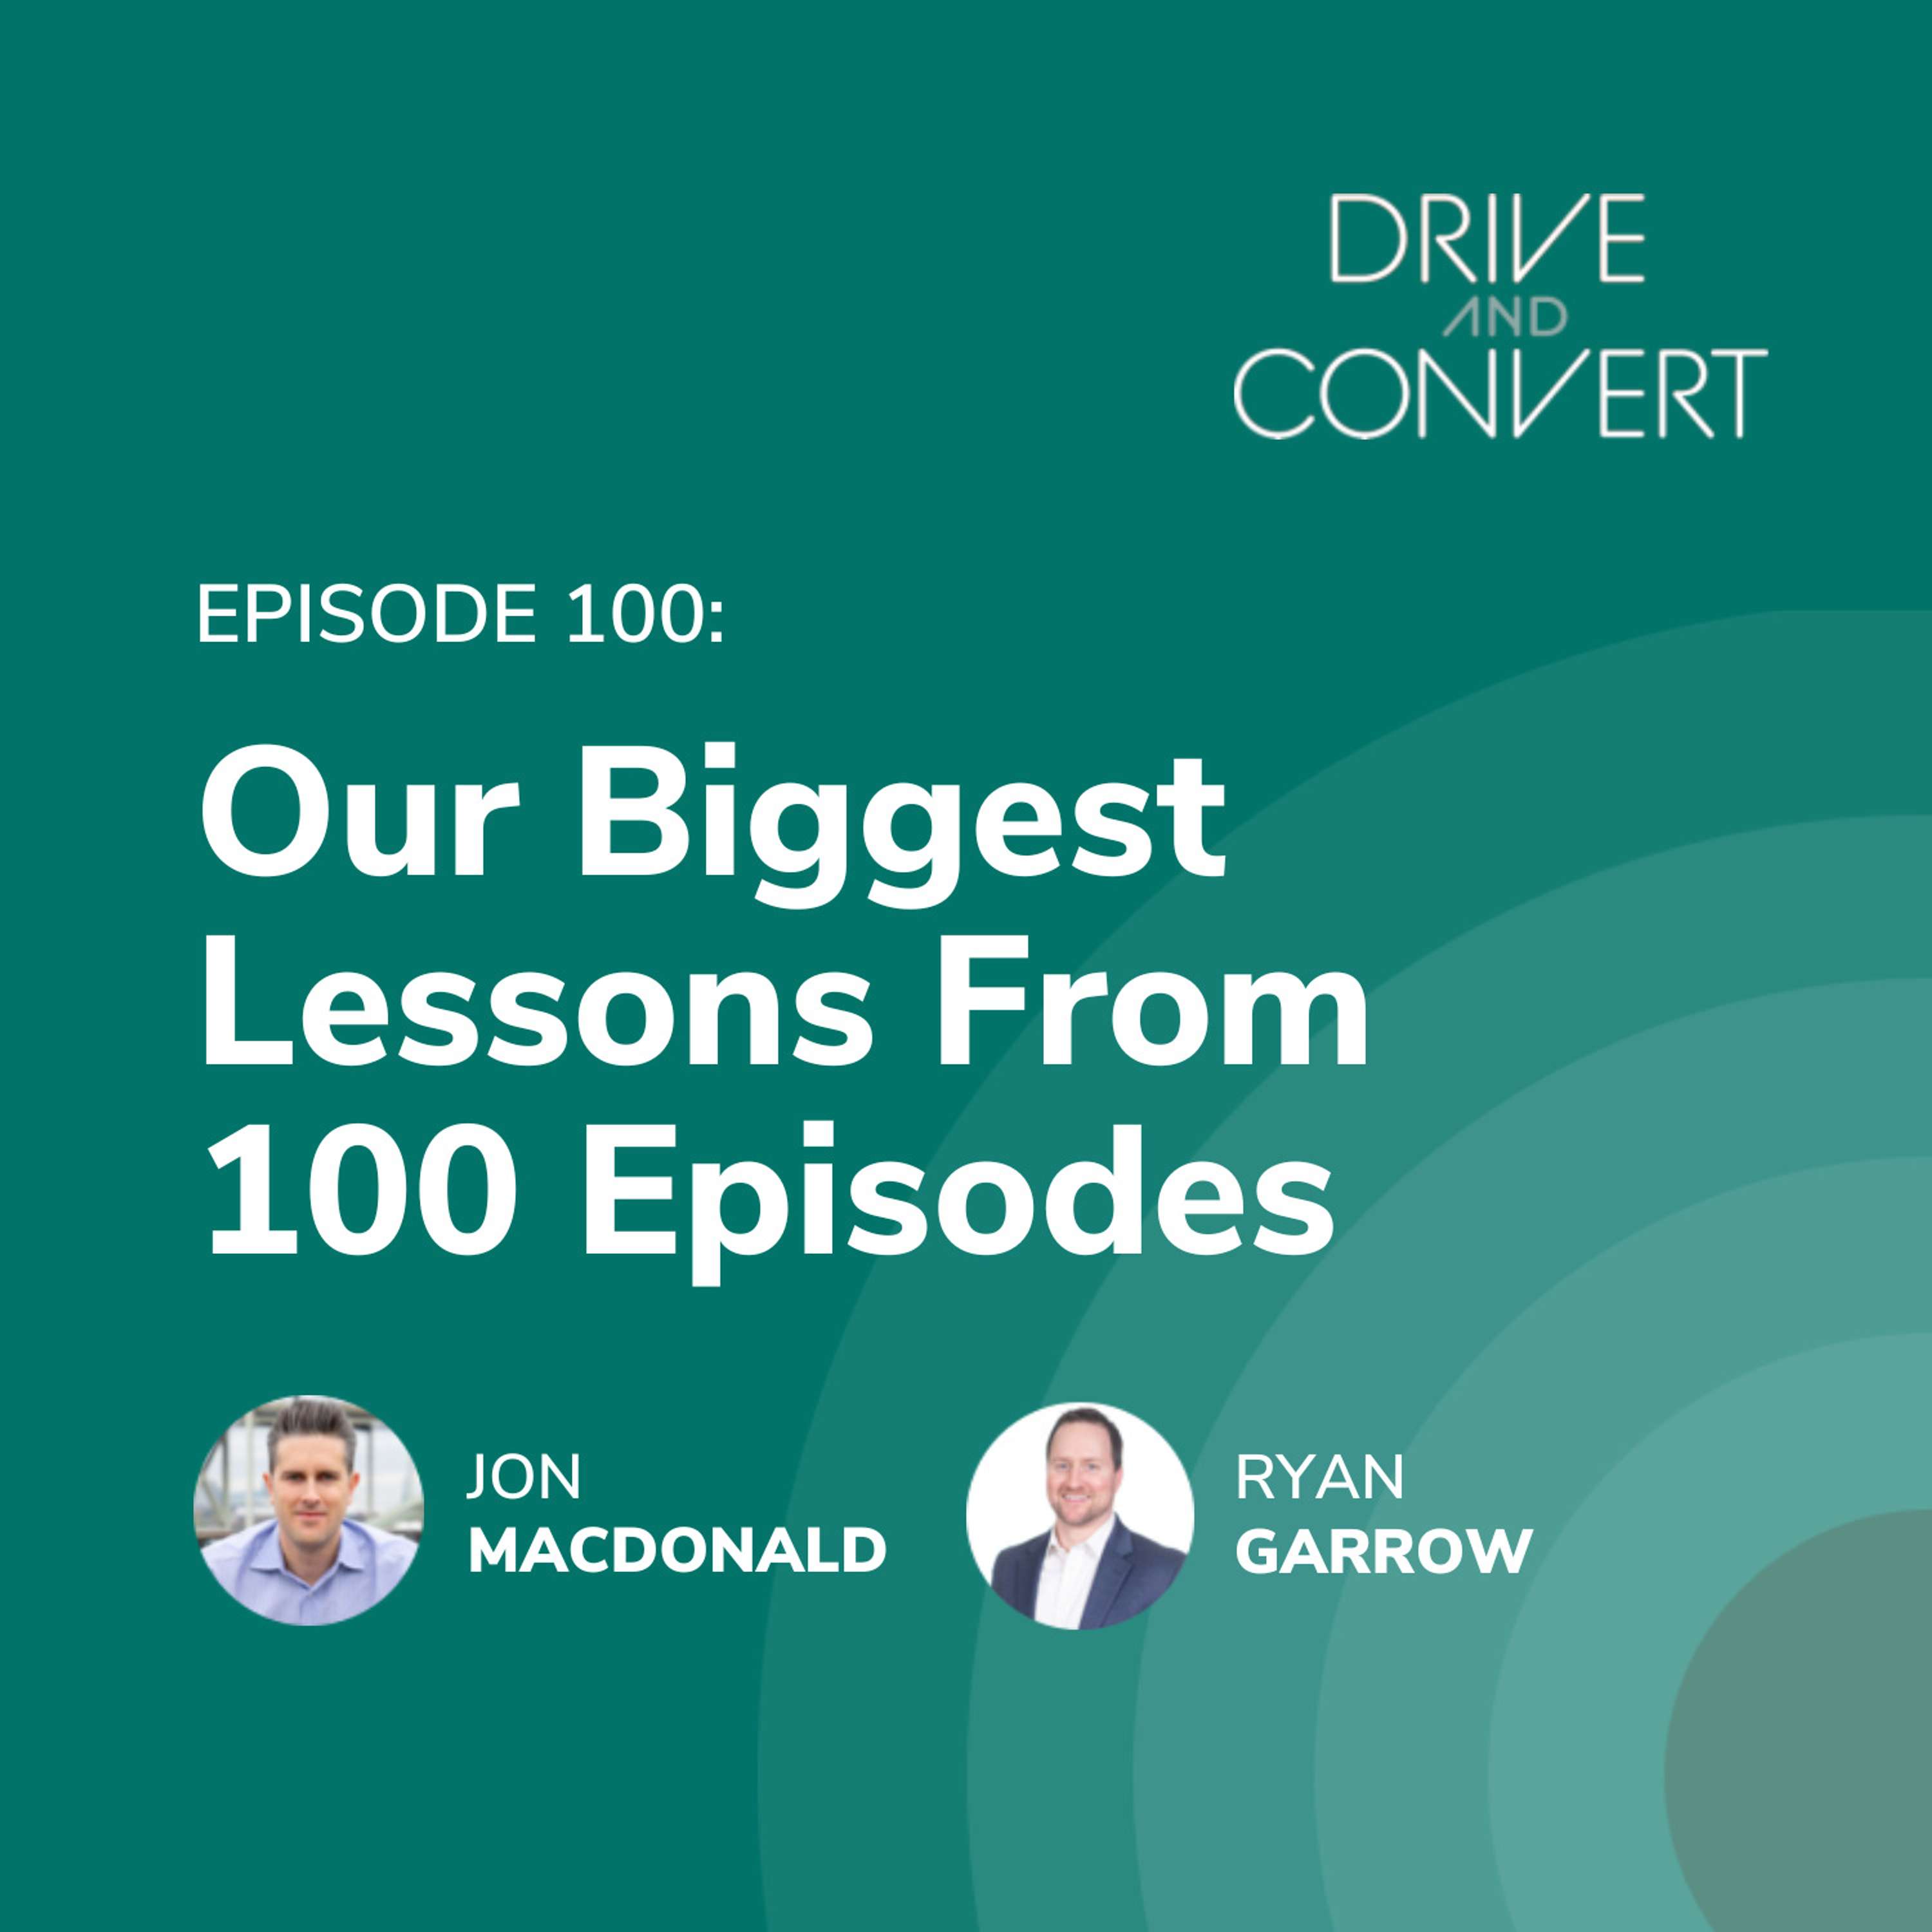 Episode 100: Our Biggest Lessons From 100 Episodes